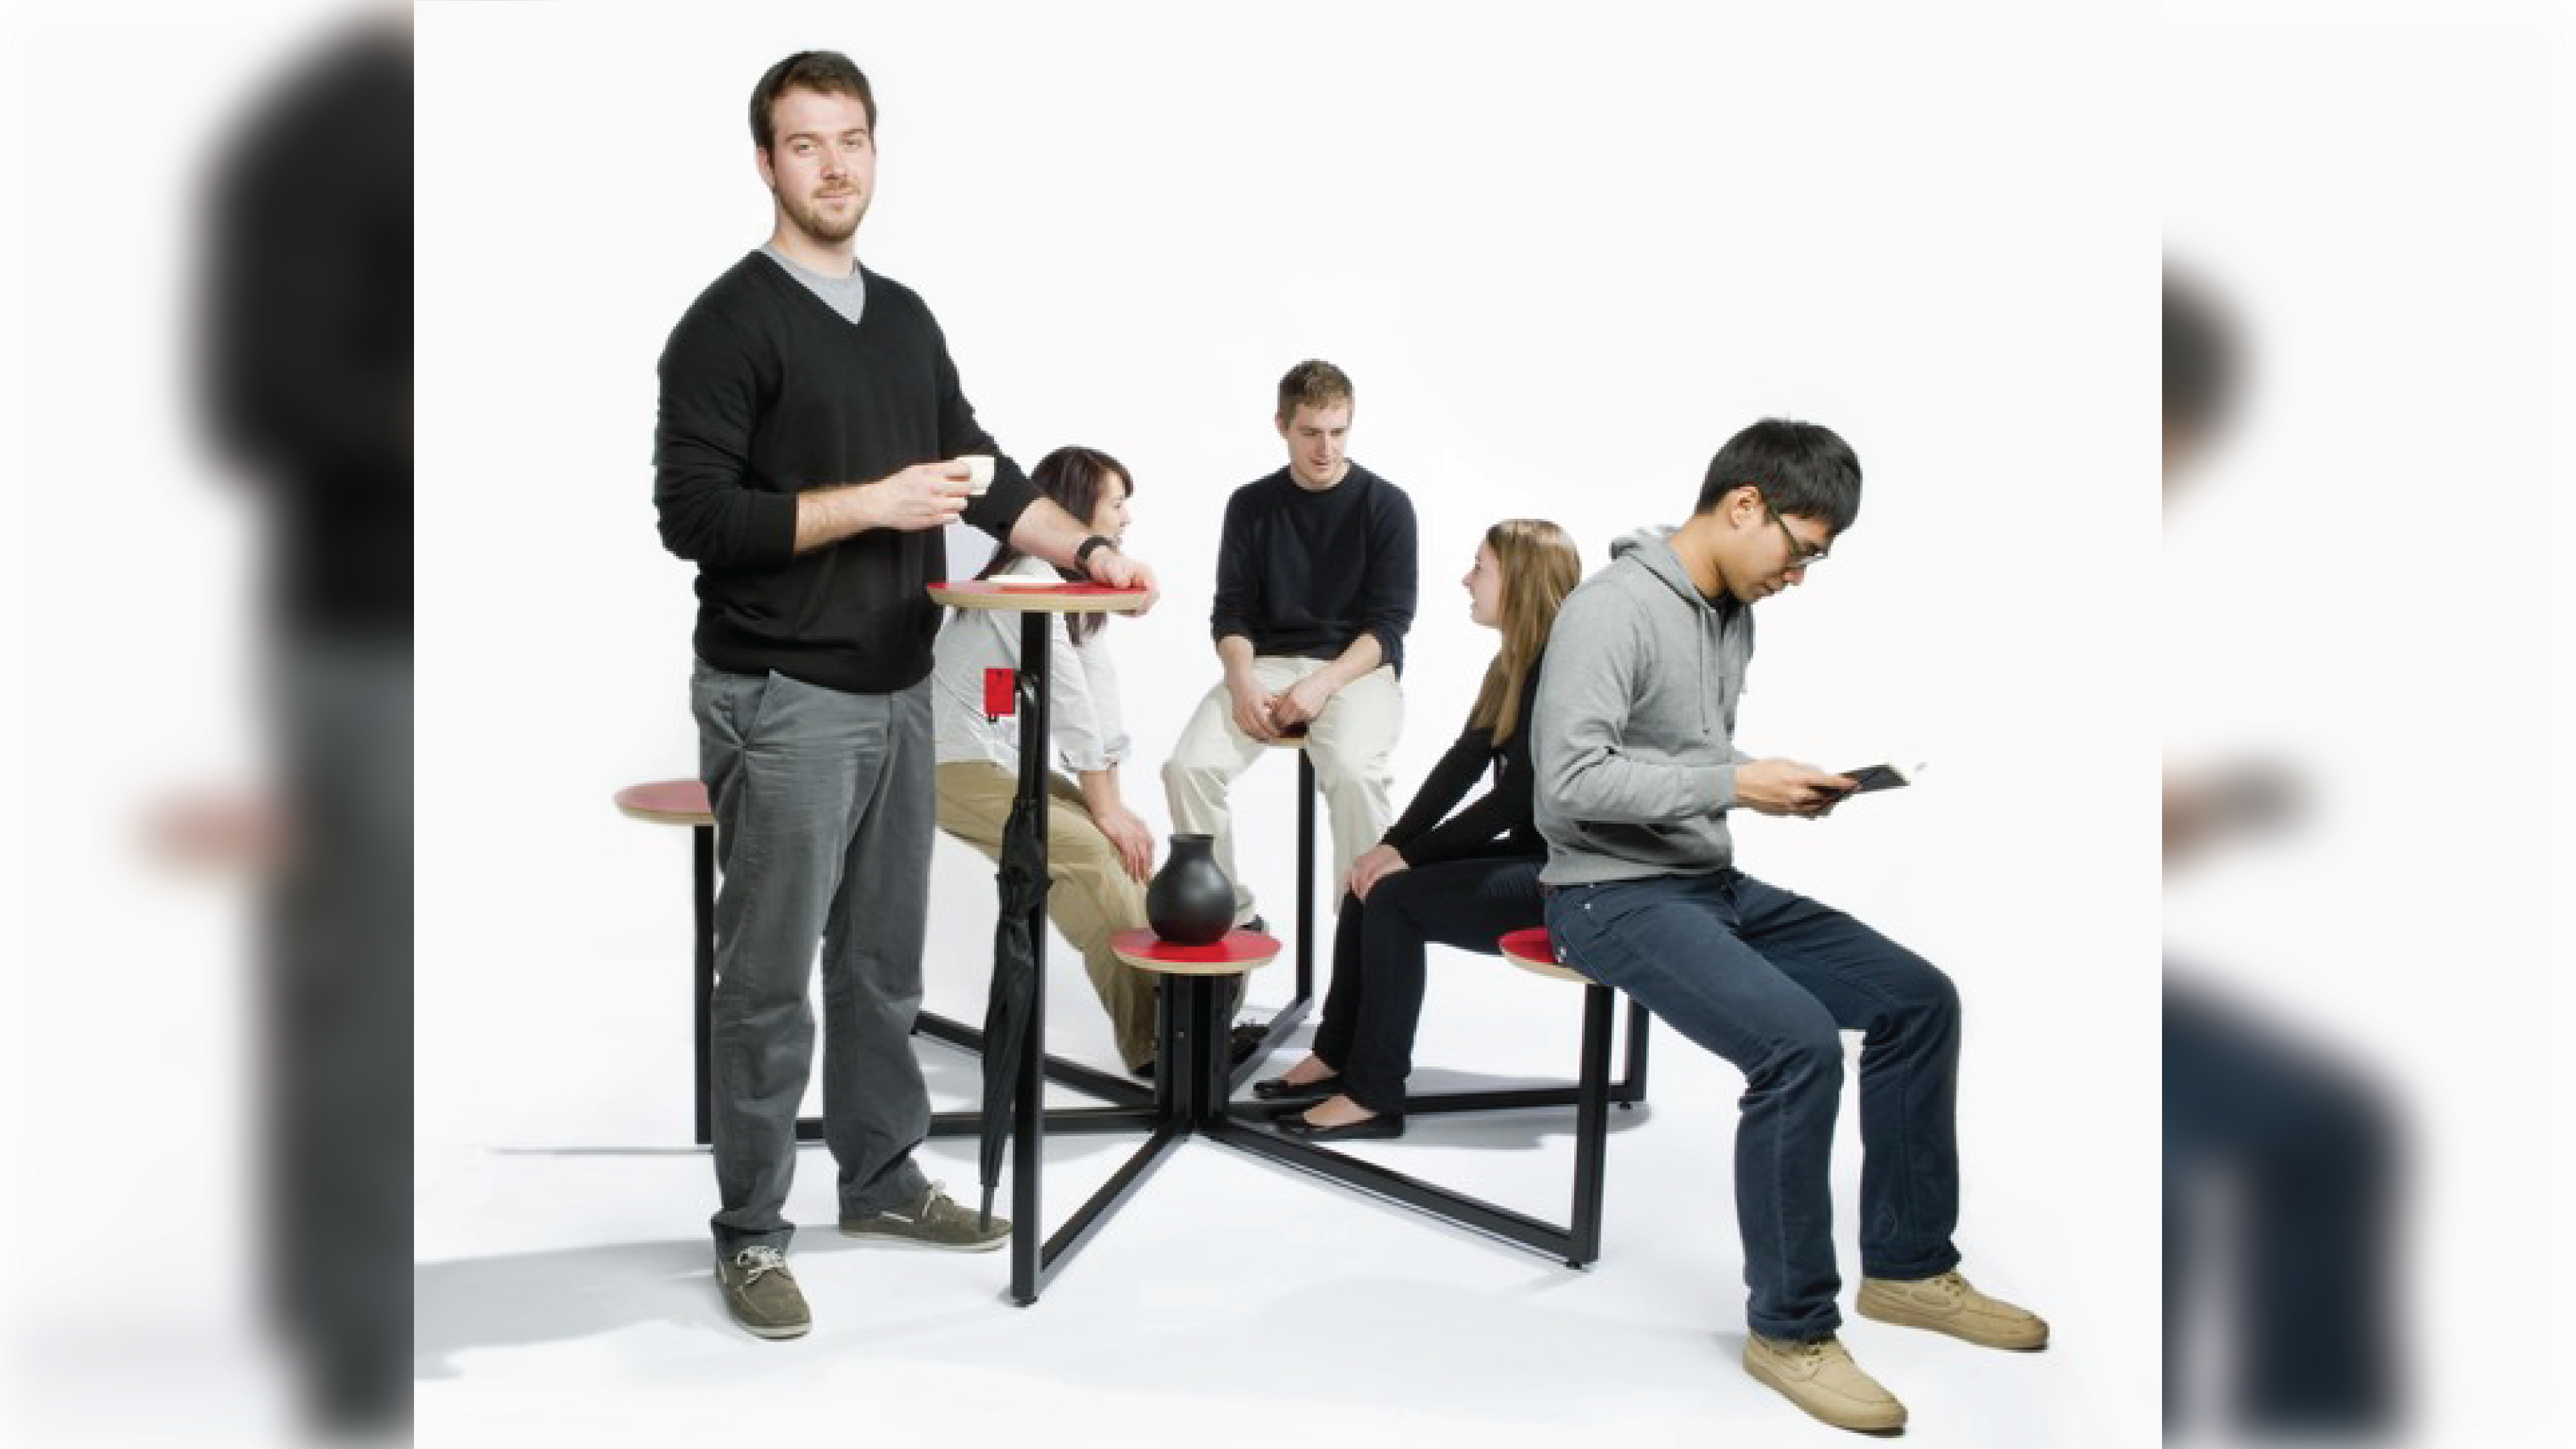 People seating and interacting with a furniture piece.